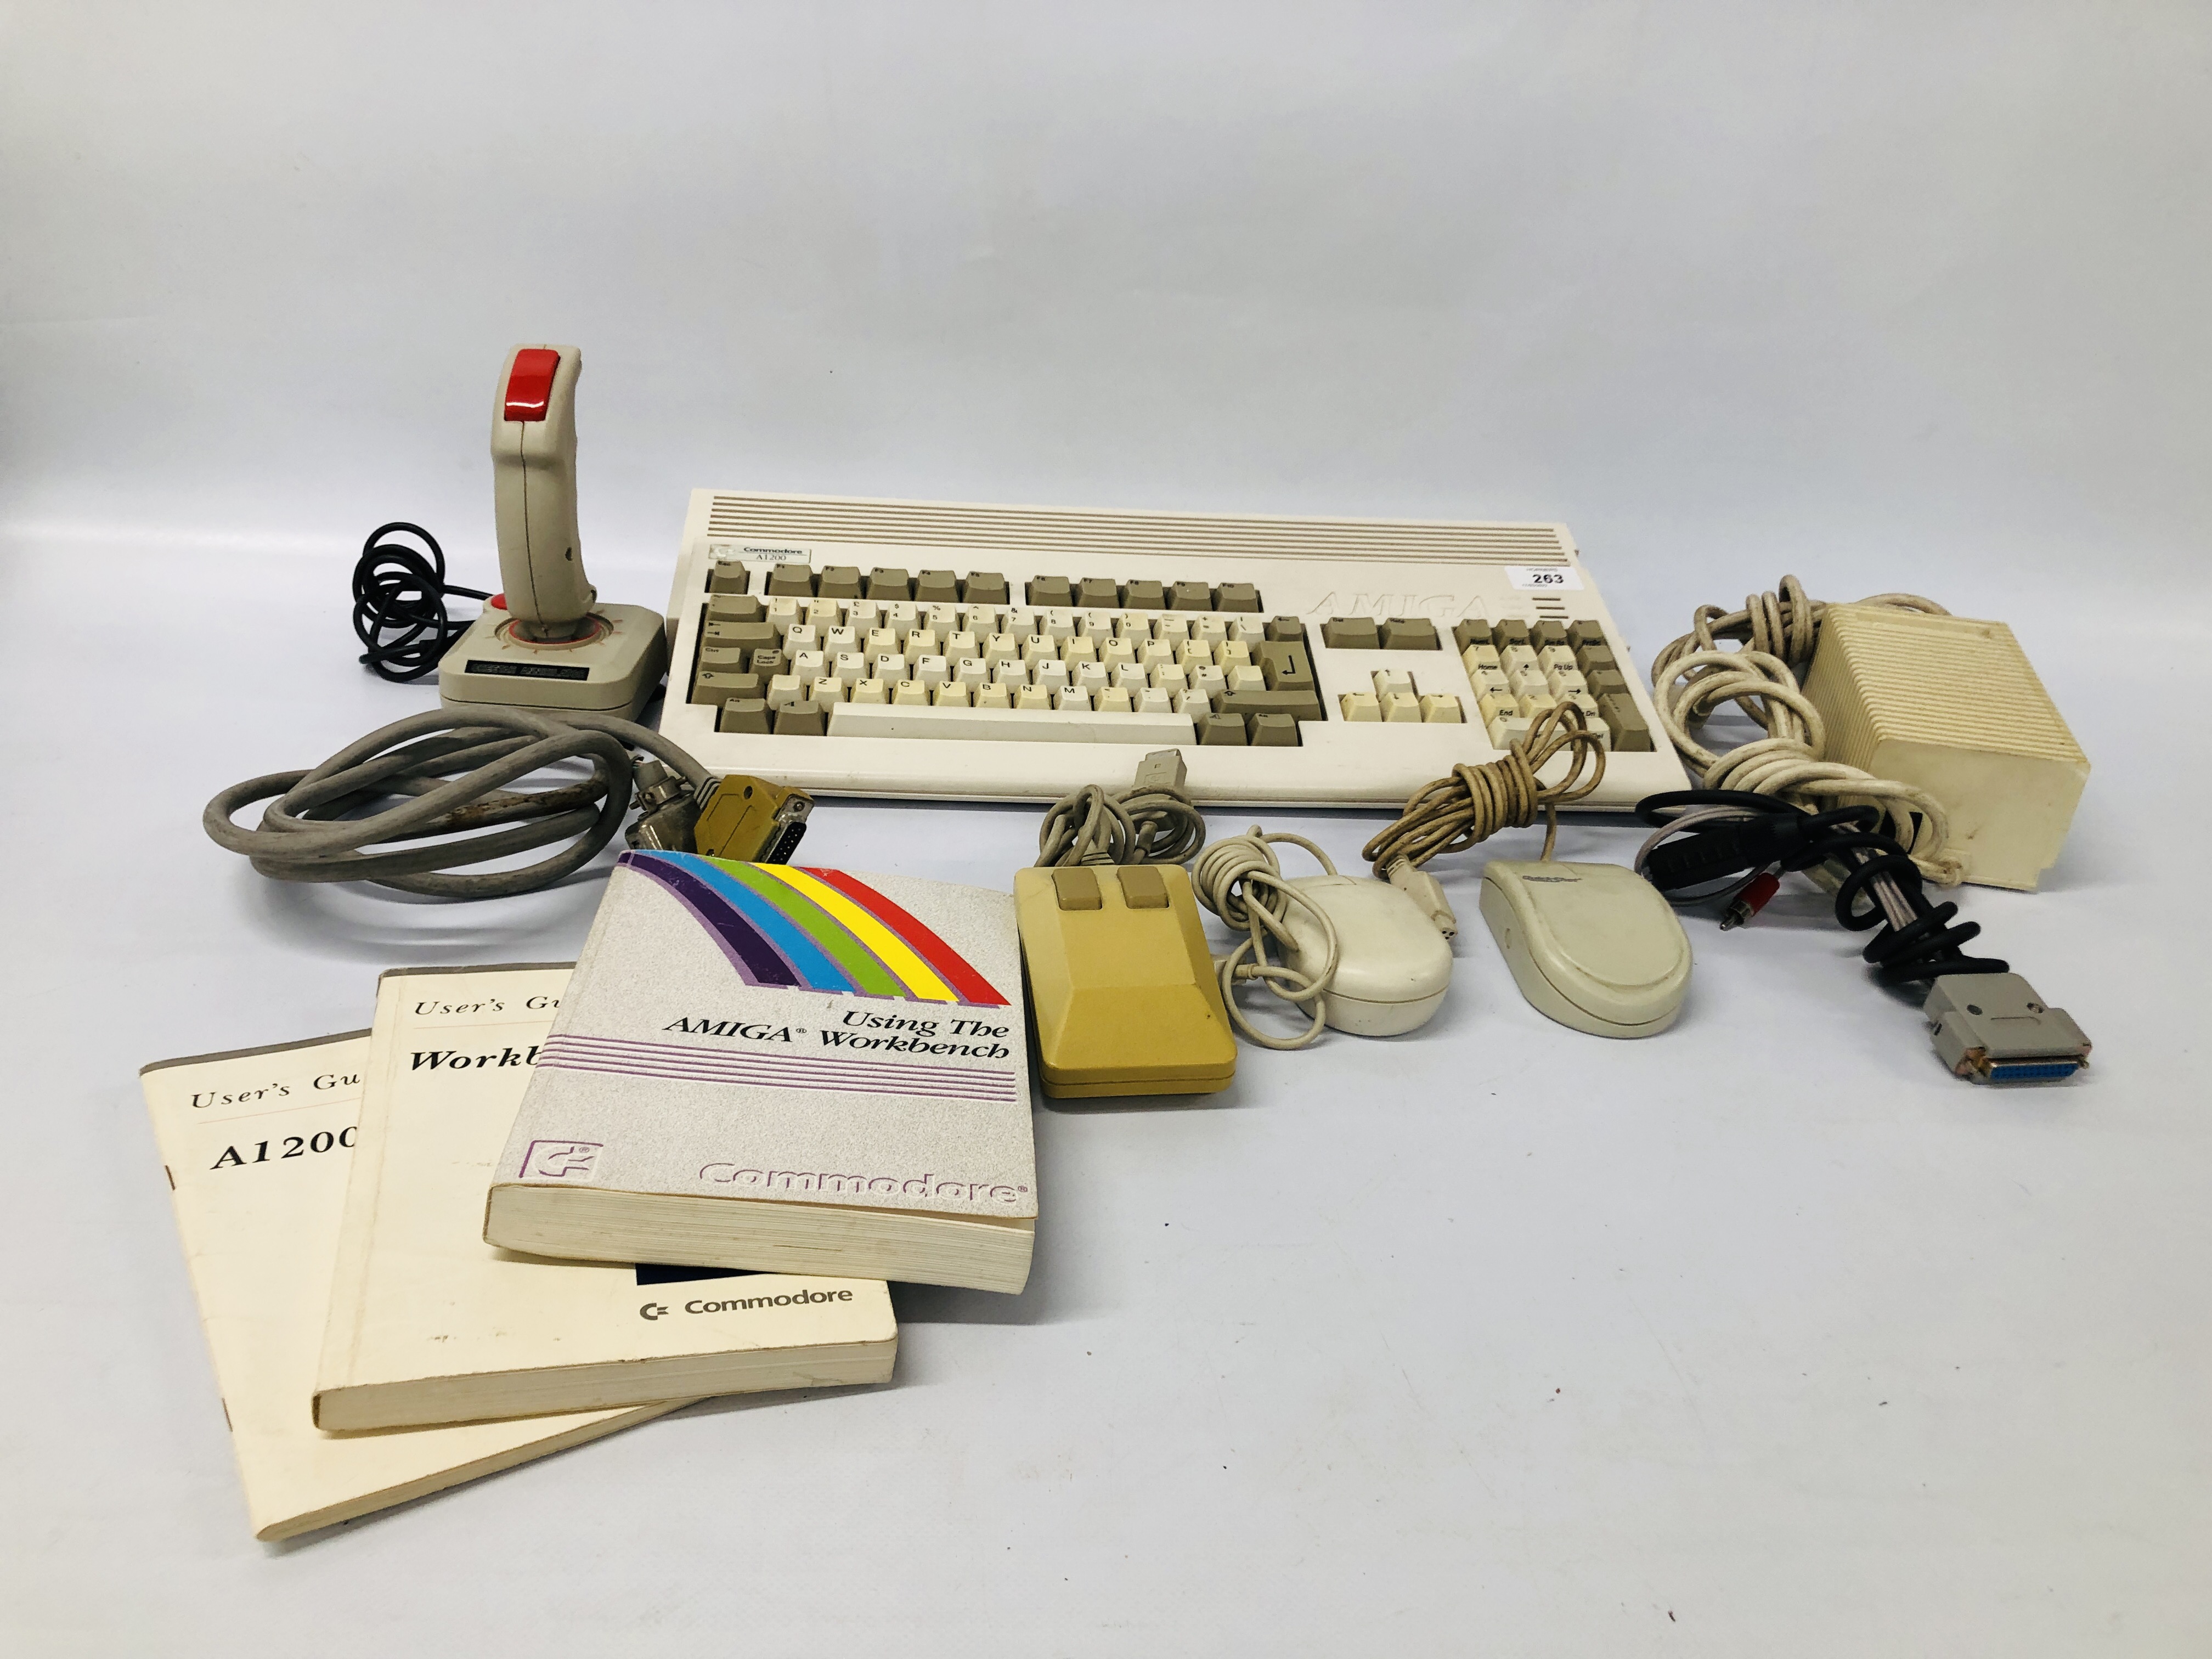 AMIGA COMMODORE A1200 CONSOLE WITH ACCESSORIES - SOLD AS SEEN